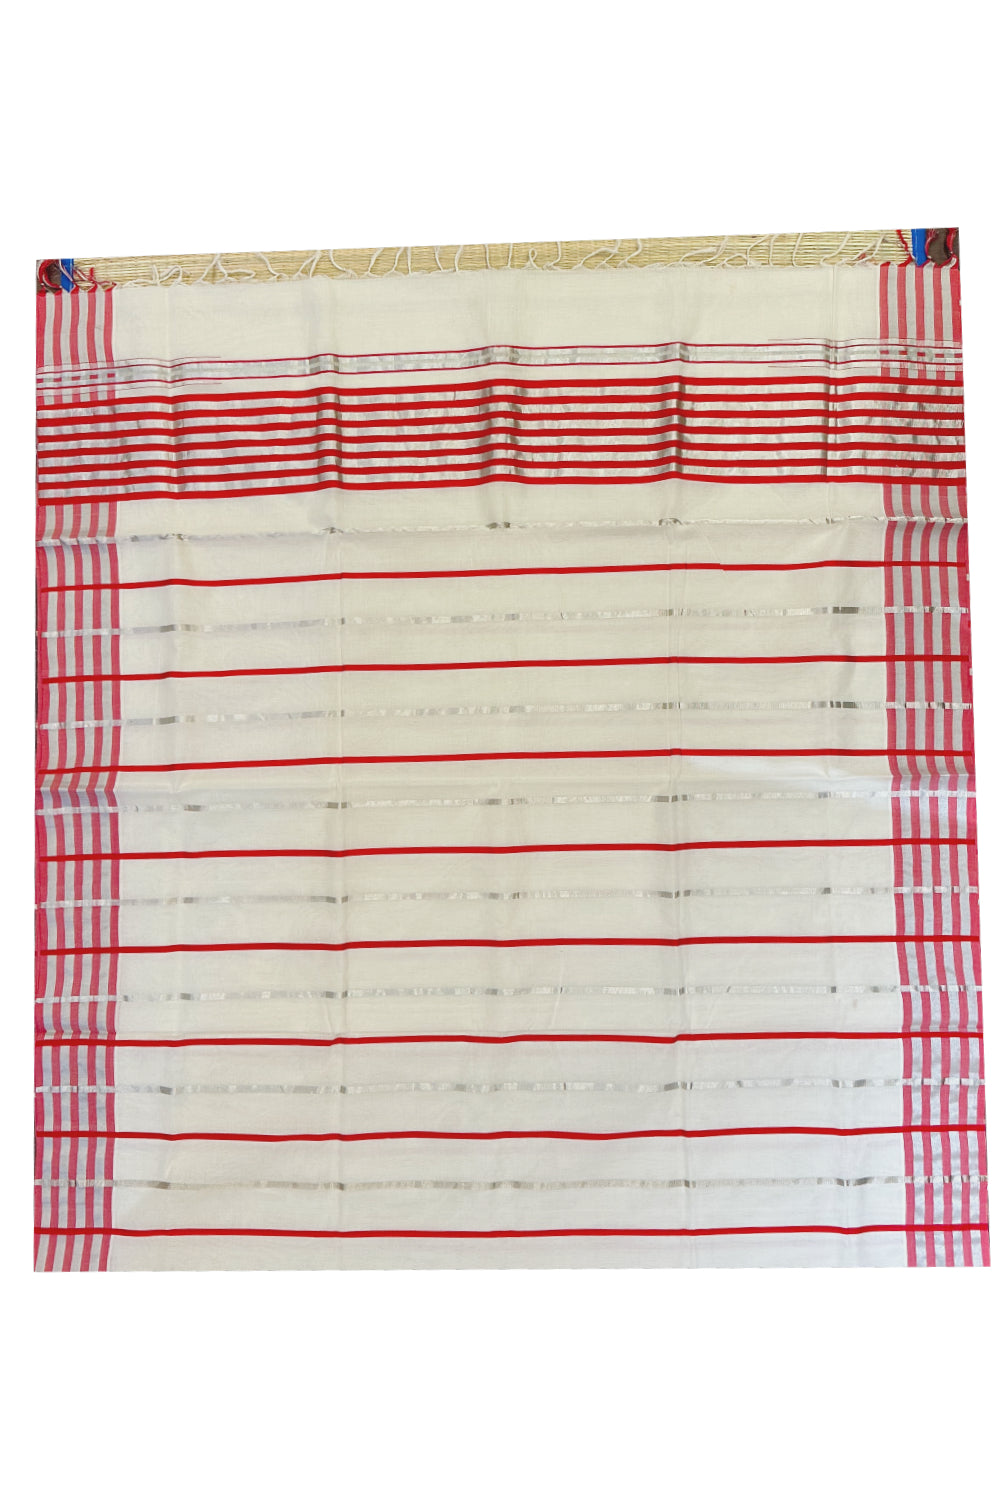 Southloom Premium Handloom Saree with Silver Kasvau and Red Lines Across Body and Lines Design Pallu